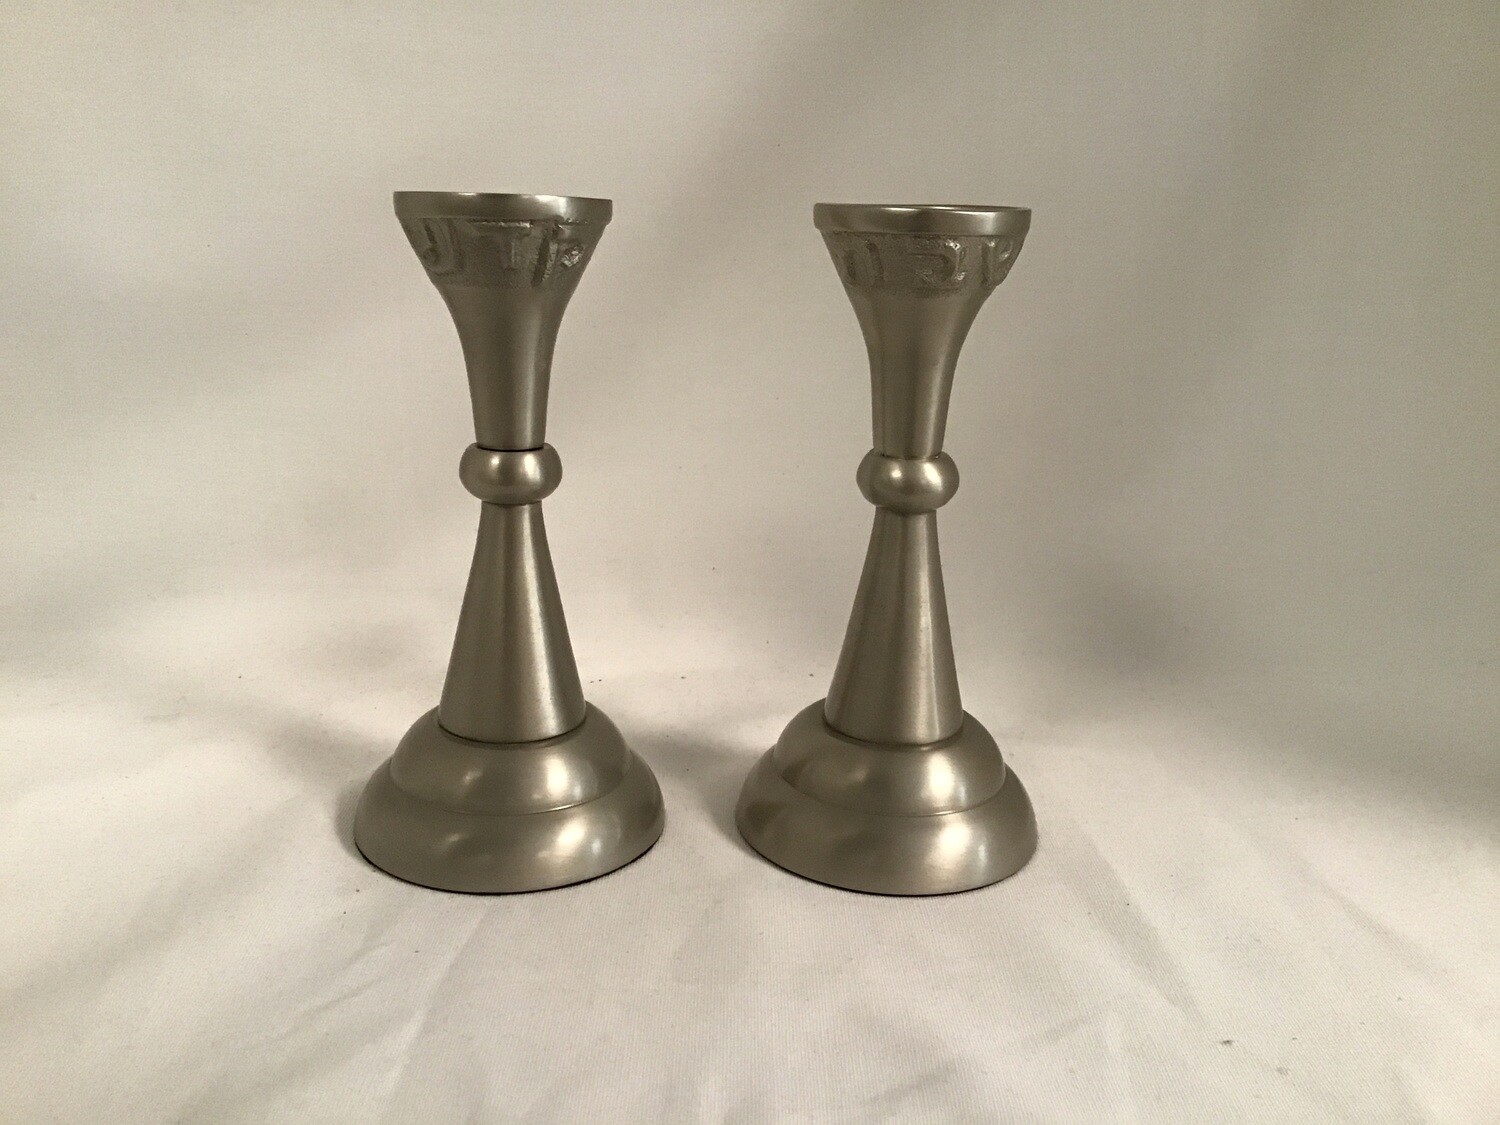 Pewter Candleholders with Shabbat Kiddush on Top